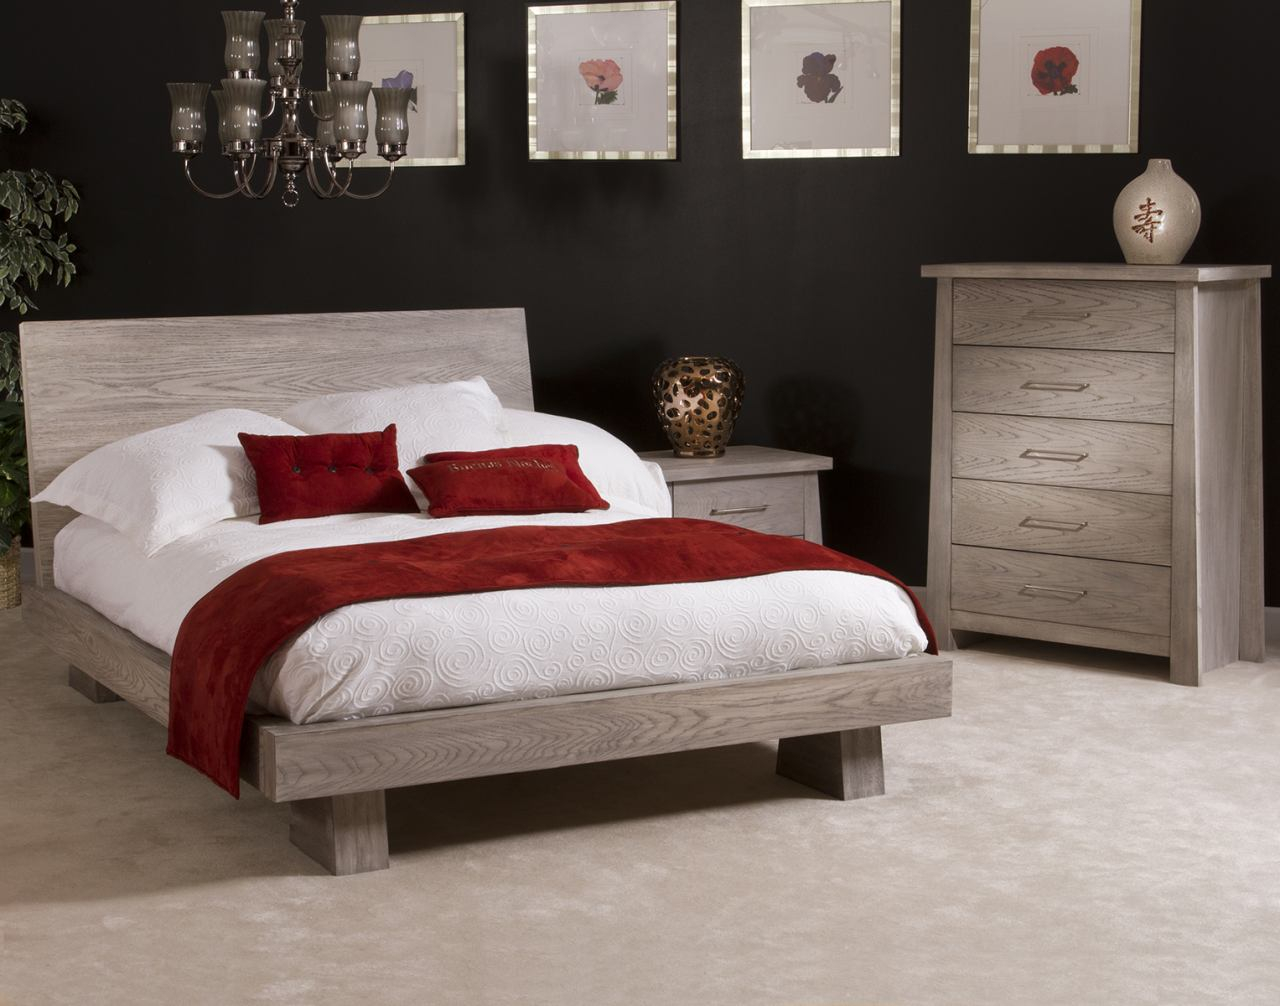 Ligna Zen 4 Piece Low Profile Bedroom Set In Driftwood pertaining to size 1280 X 1006